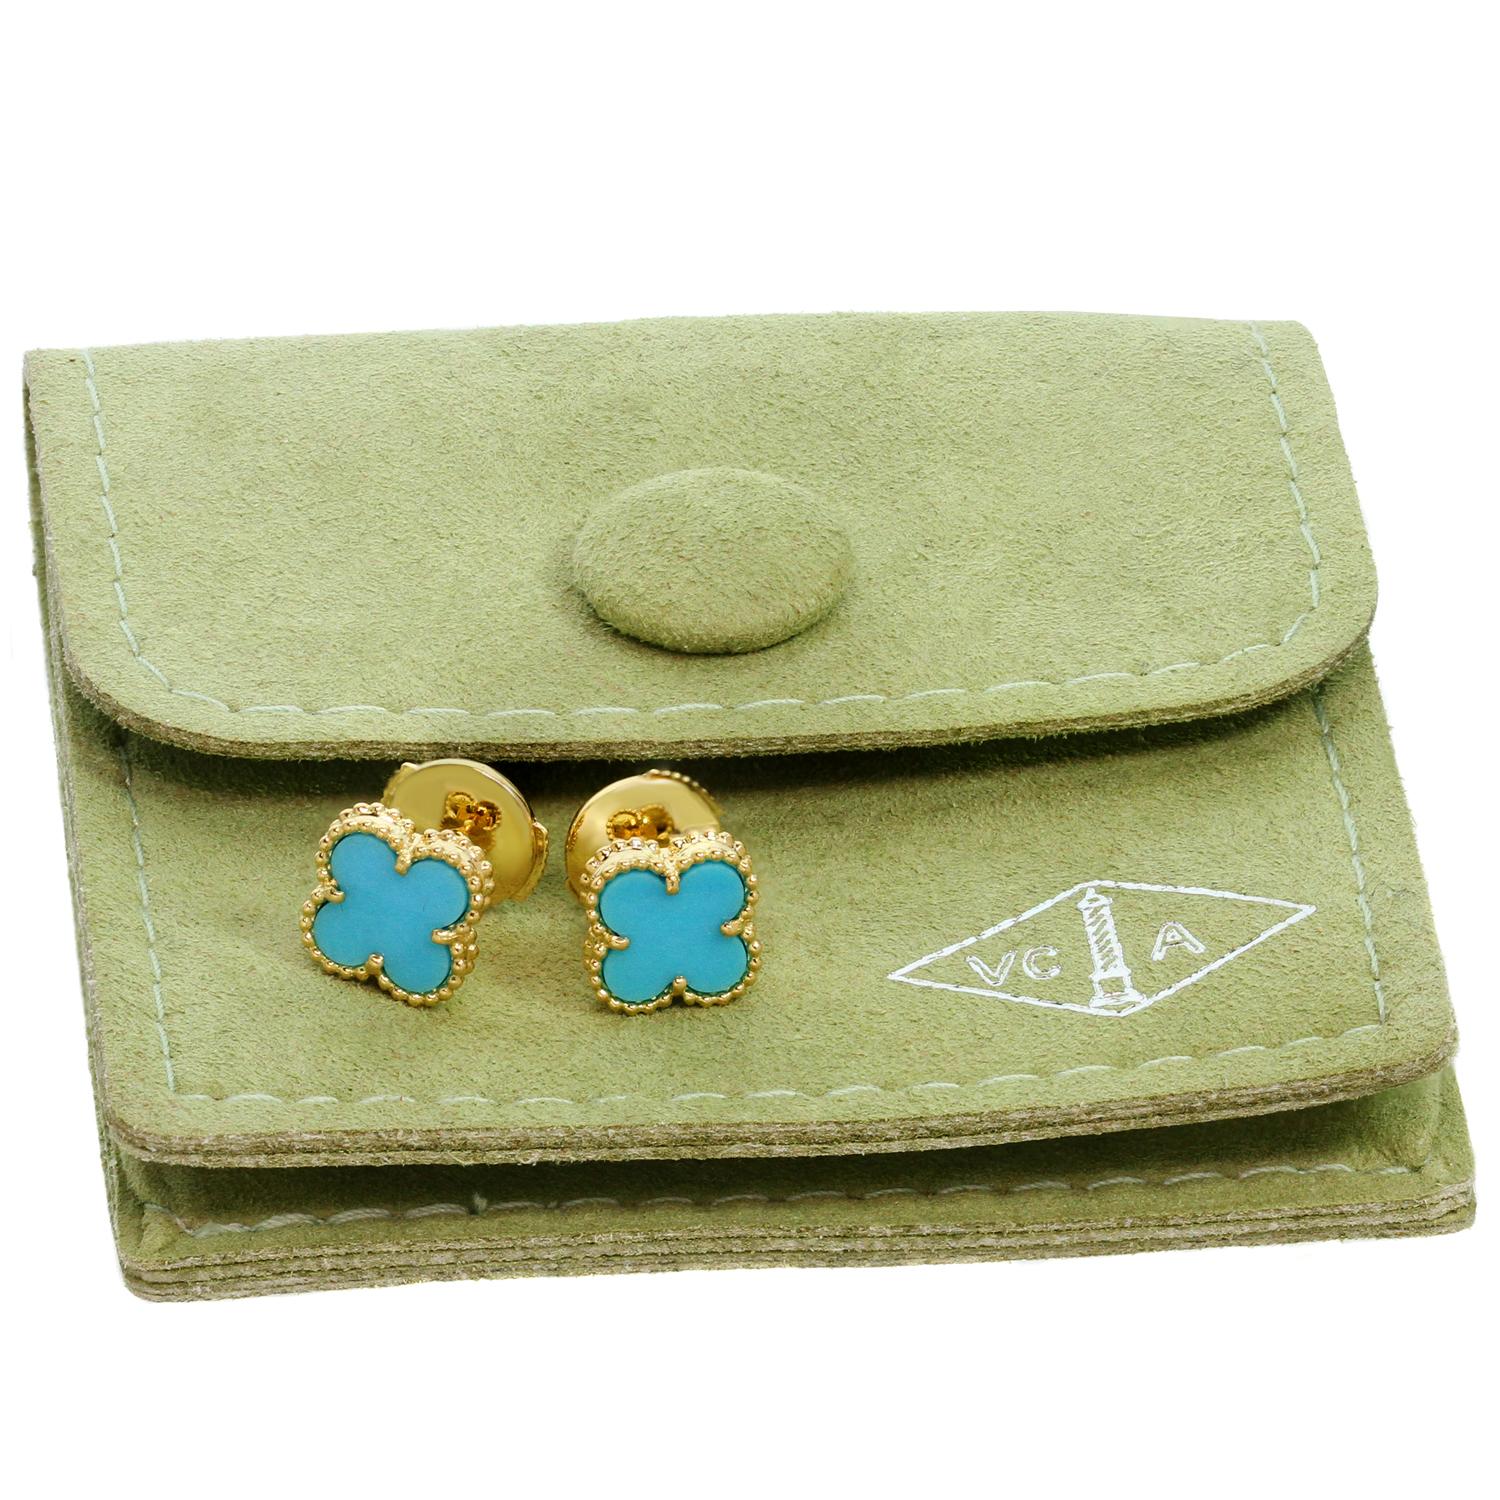 These gorgeous Van Cleef & Arpels earrings iconic Sweet Alhambra collection feature the lucky clover design crafted in 18k yellow gold and set with blue turquoise stones. Made in France circa 2000s. Measurements: 0.35